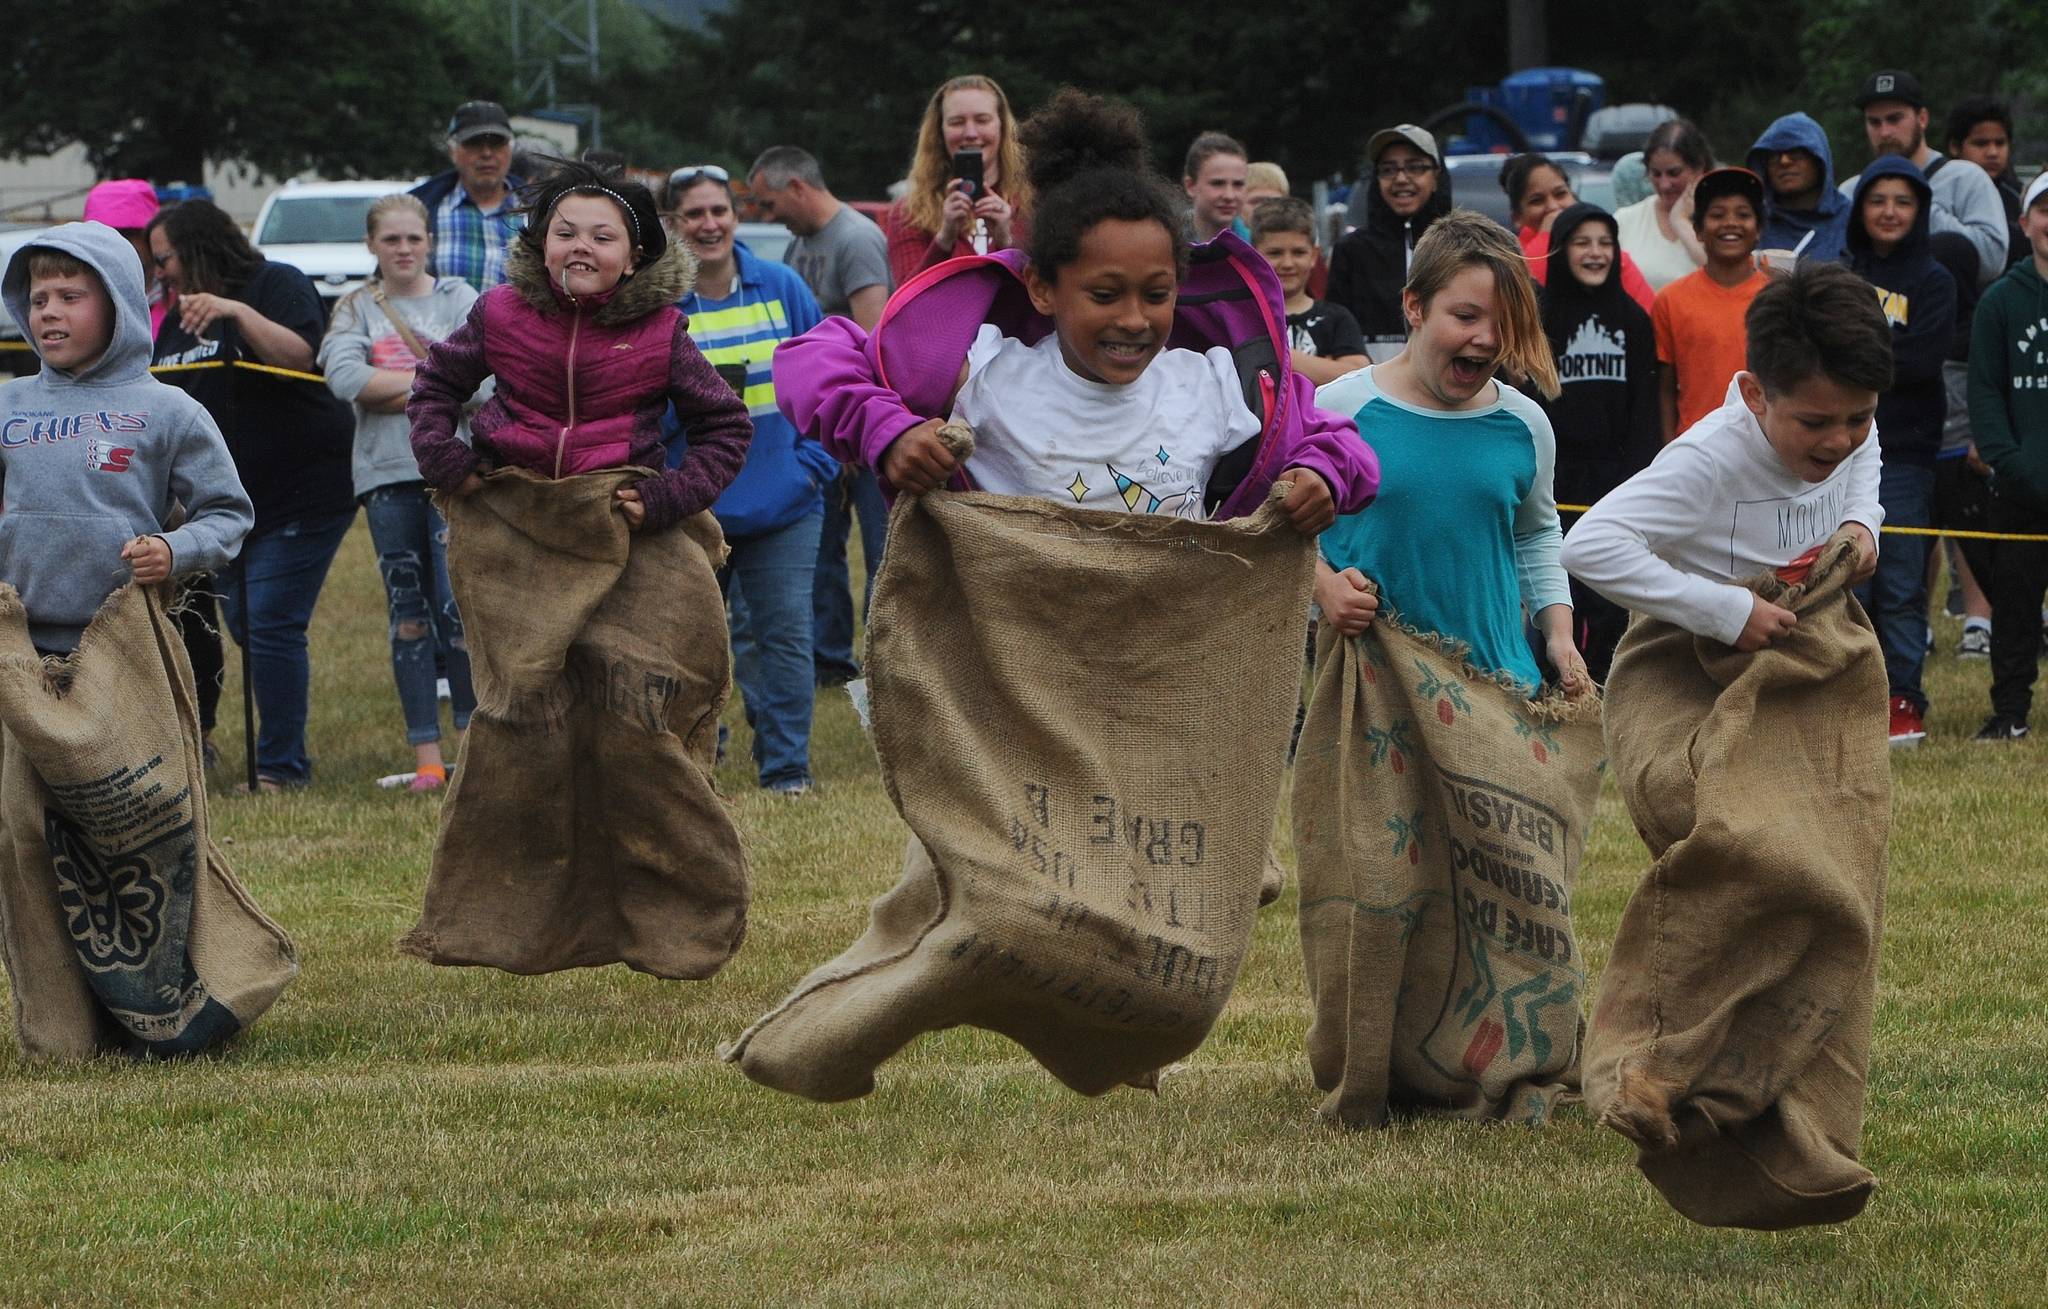 The 9 and 10-year-olds compete in the gunny sack races. Photo by Lonnie Archibald